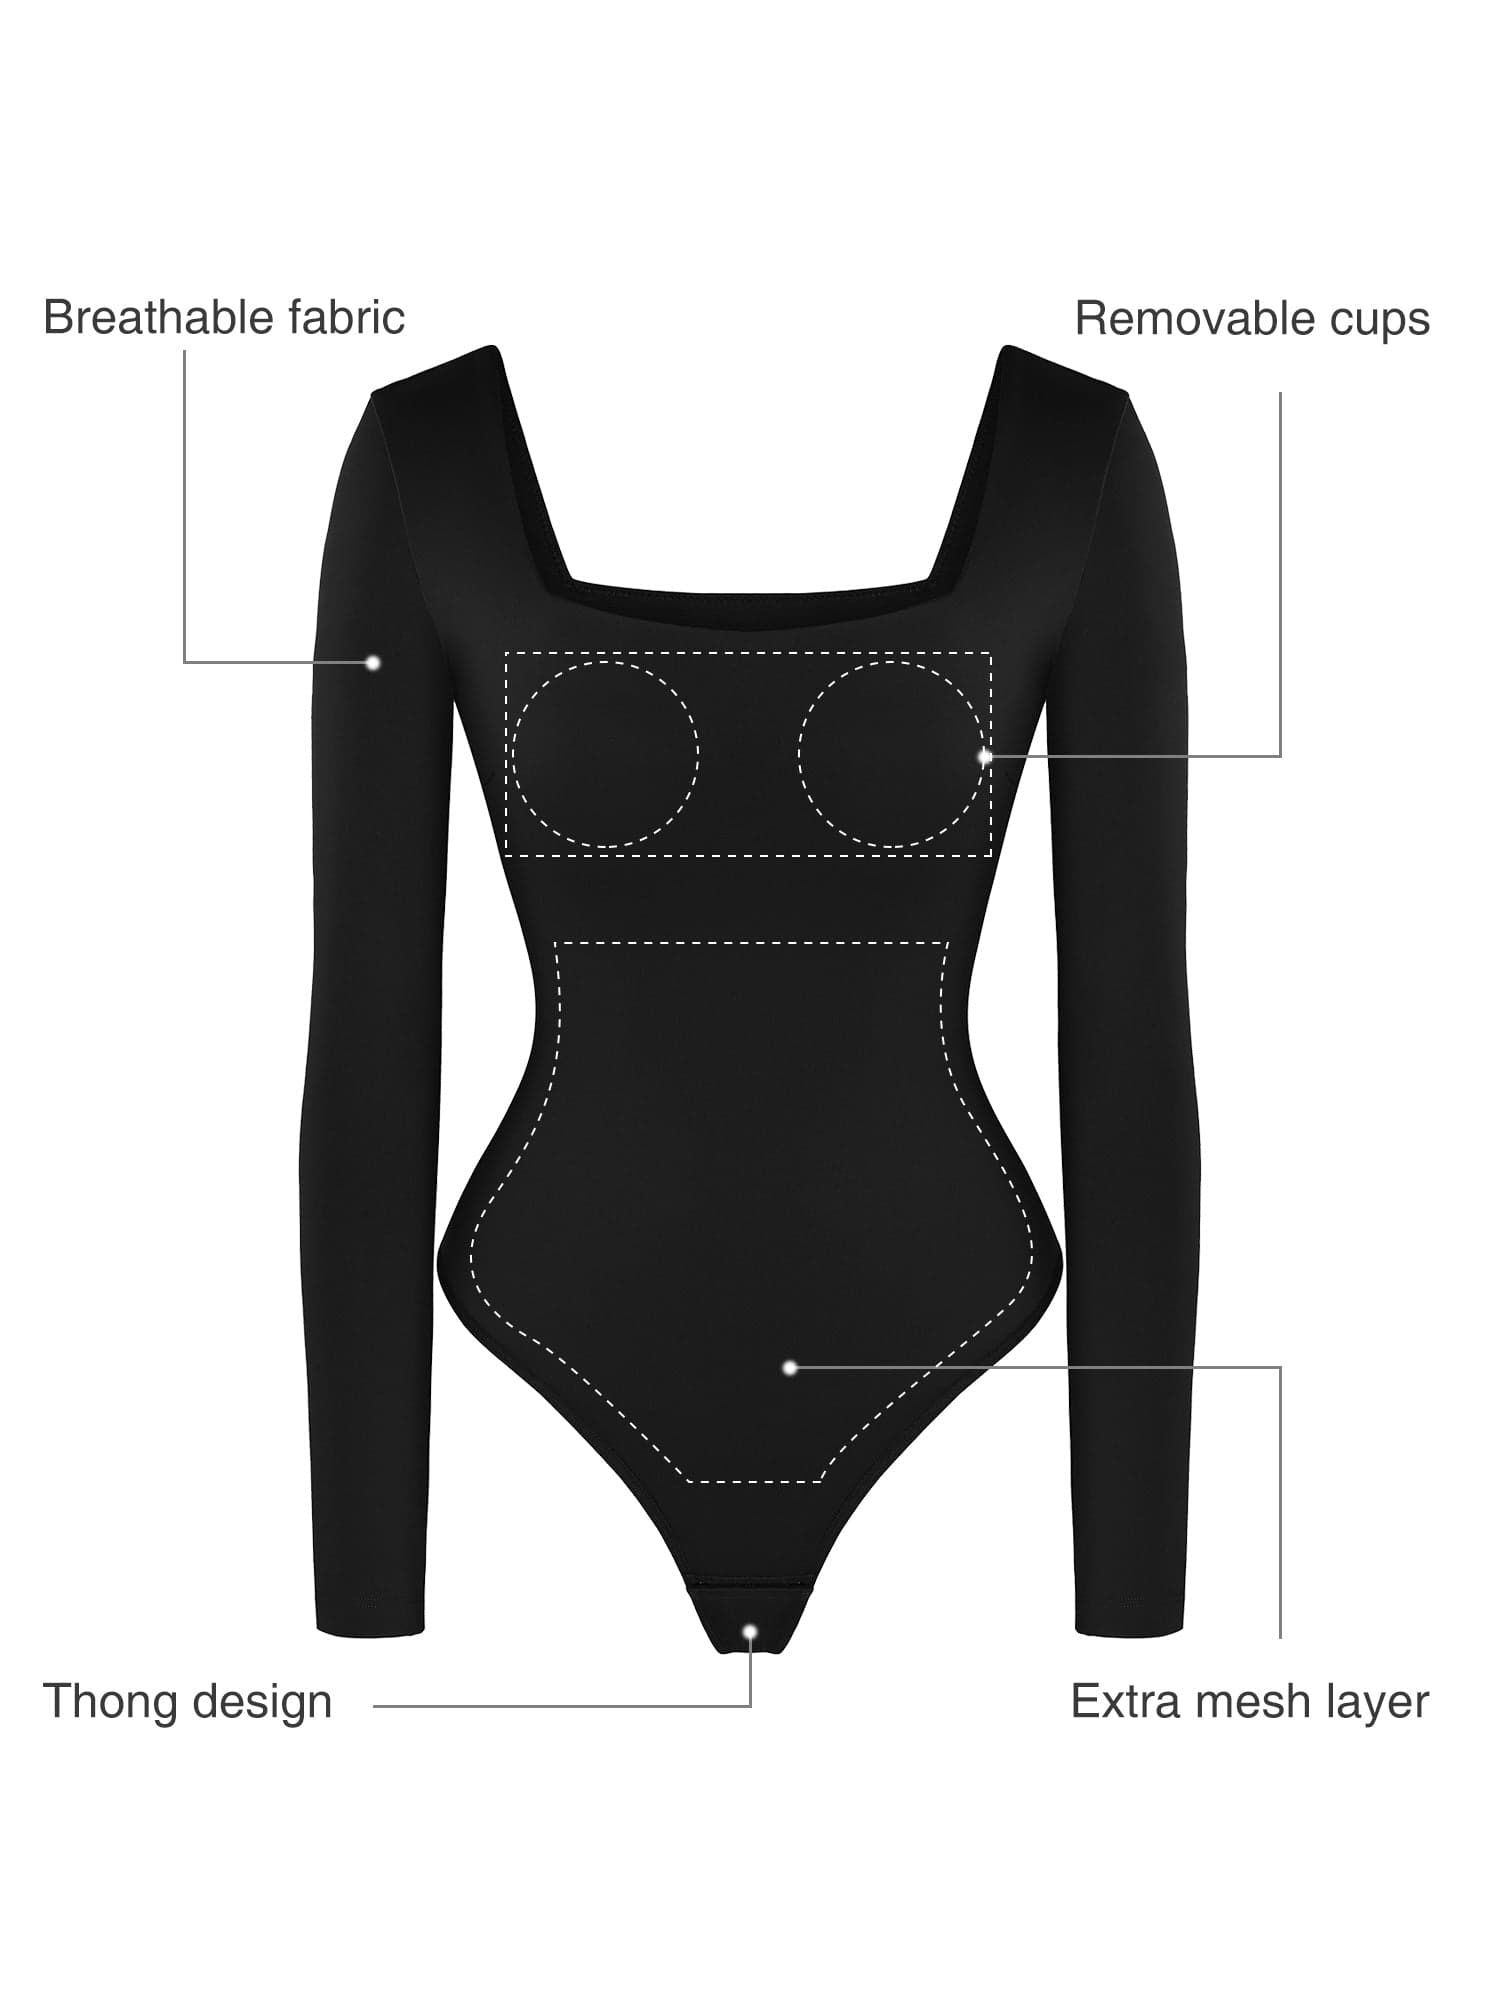 Cotton-jersey Thong Bodysuit Technical Fashion Illustration with